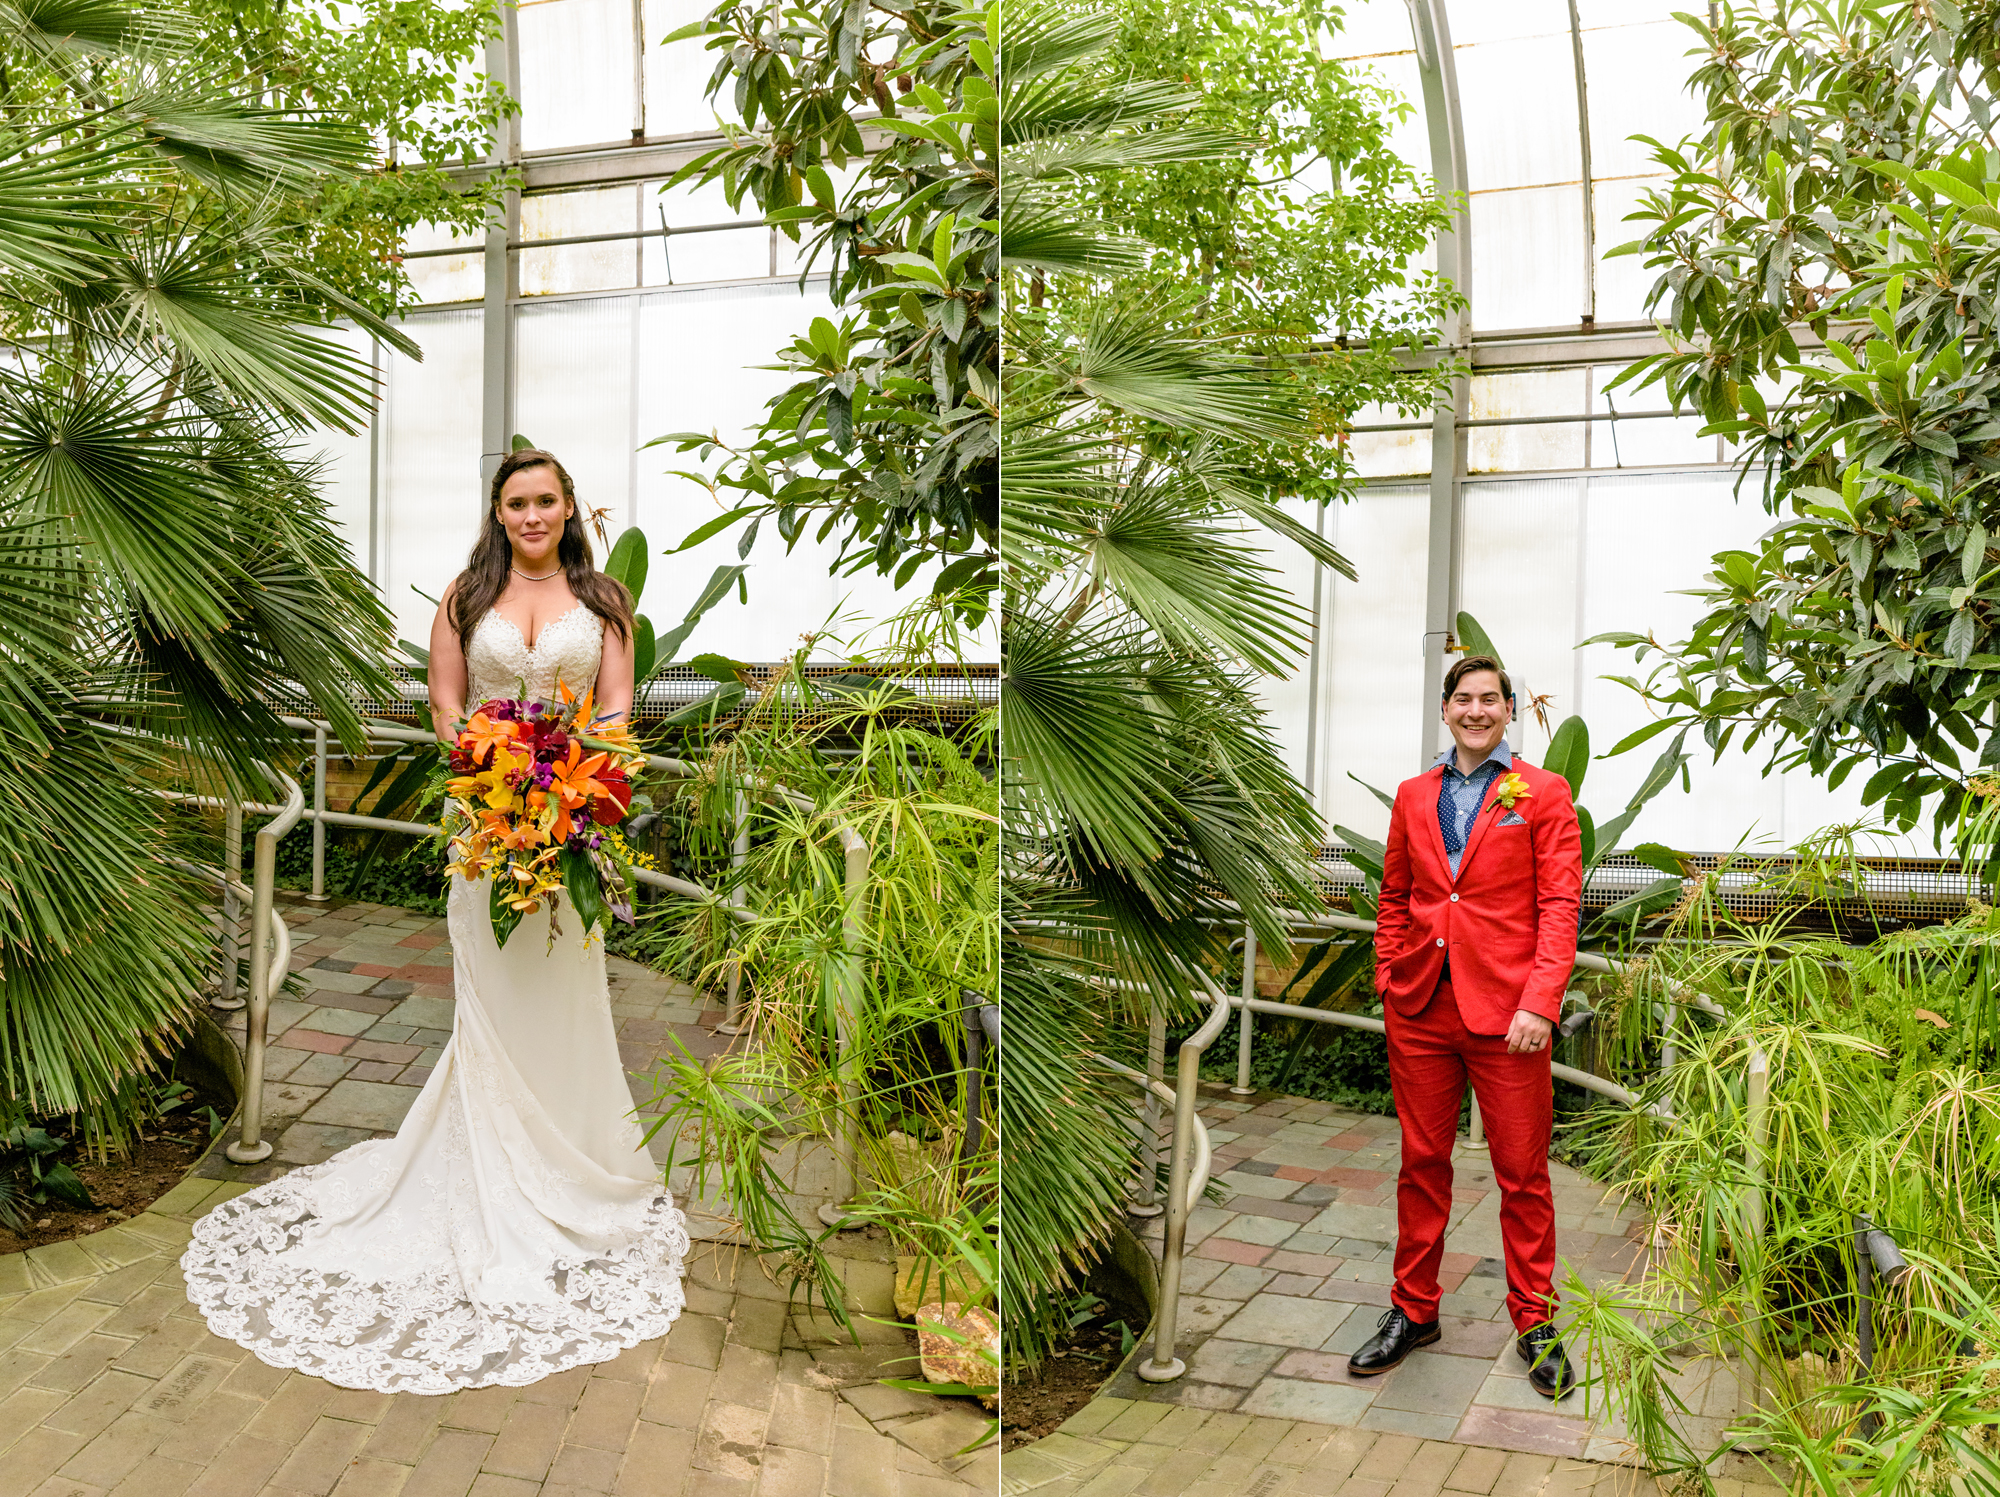 Bride & Groom portraits after their wedding ceremony at Potawatomi Conservatory